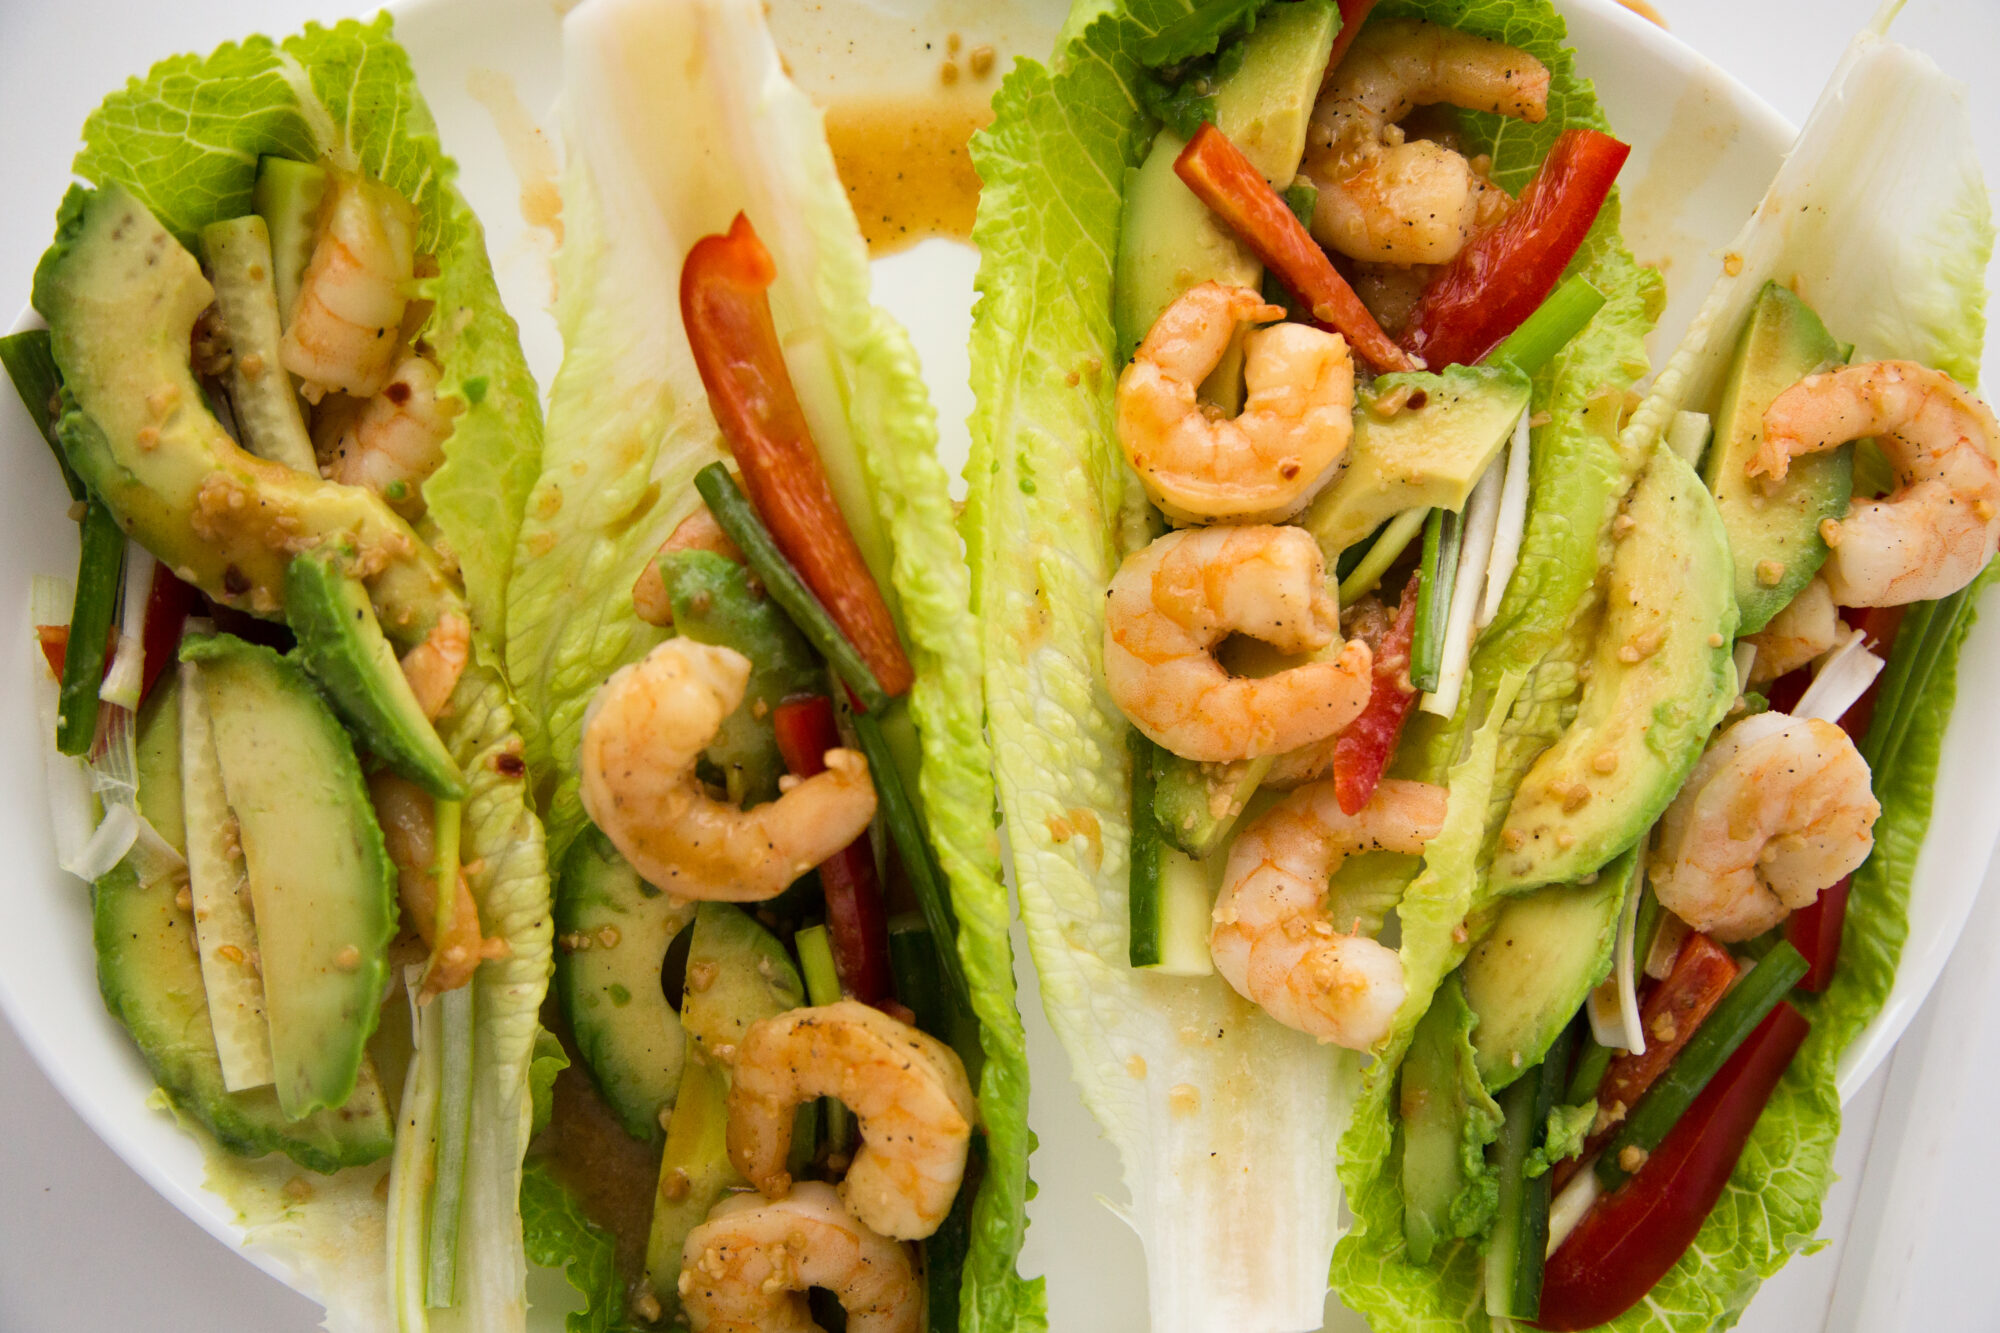 Close up - Lettuce leaves topped with spicy shrimp, sliced avocado and red peppers.